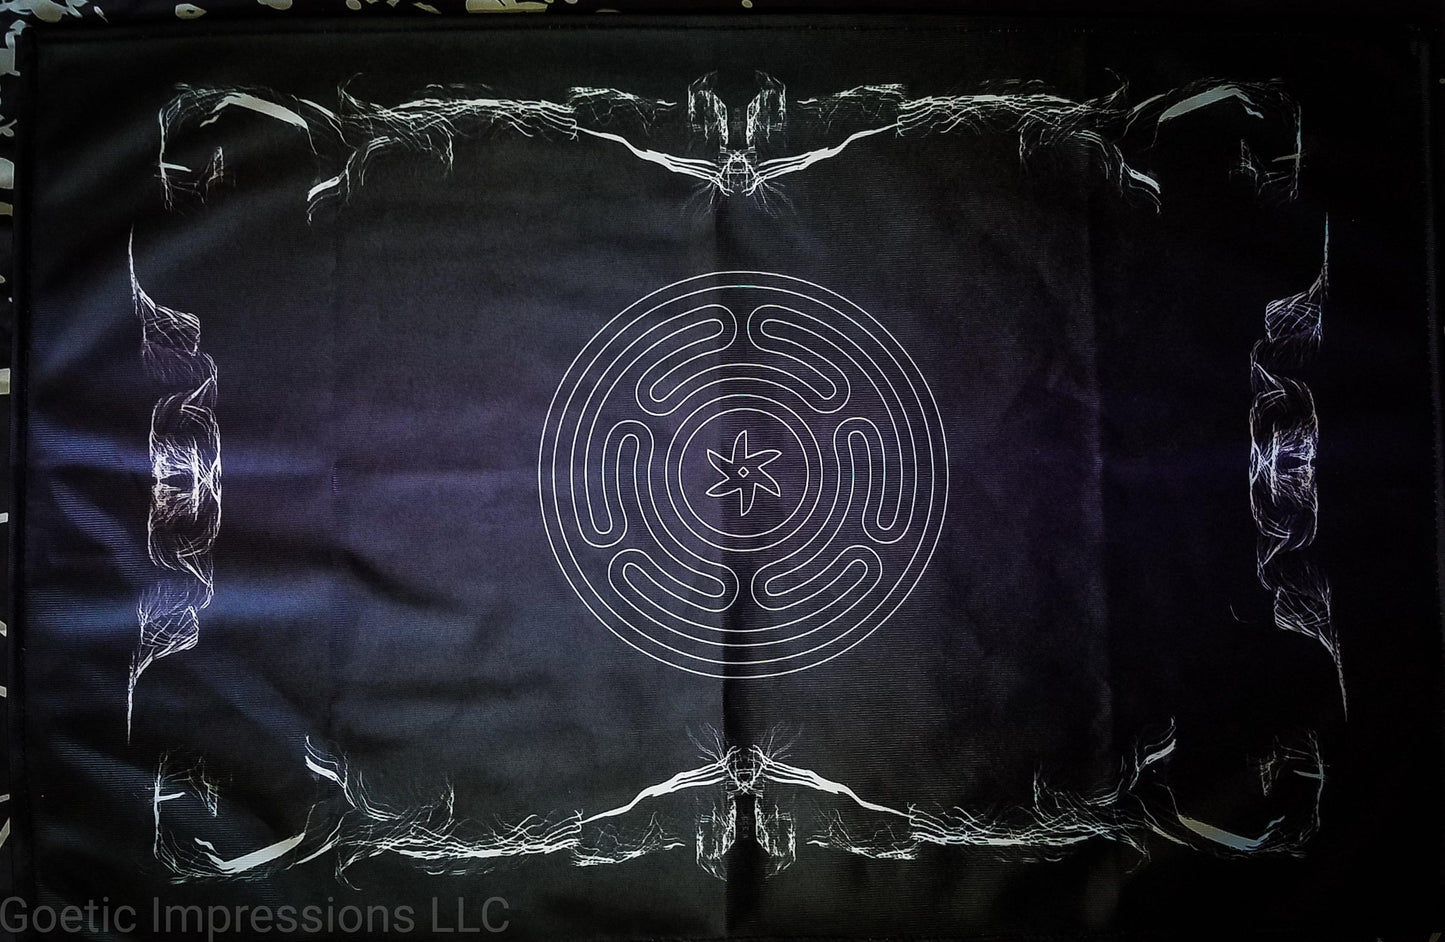 An altar cloth featuring the stropholos or wheel of hecate in the center. The altar cloth background is black and purple with white print and a design around the border. 